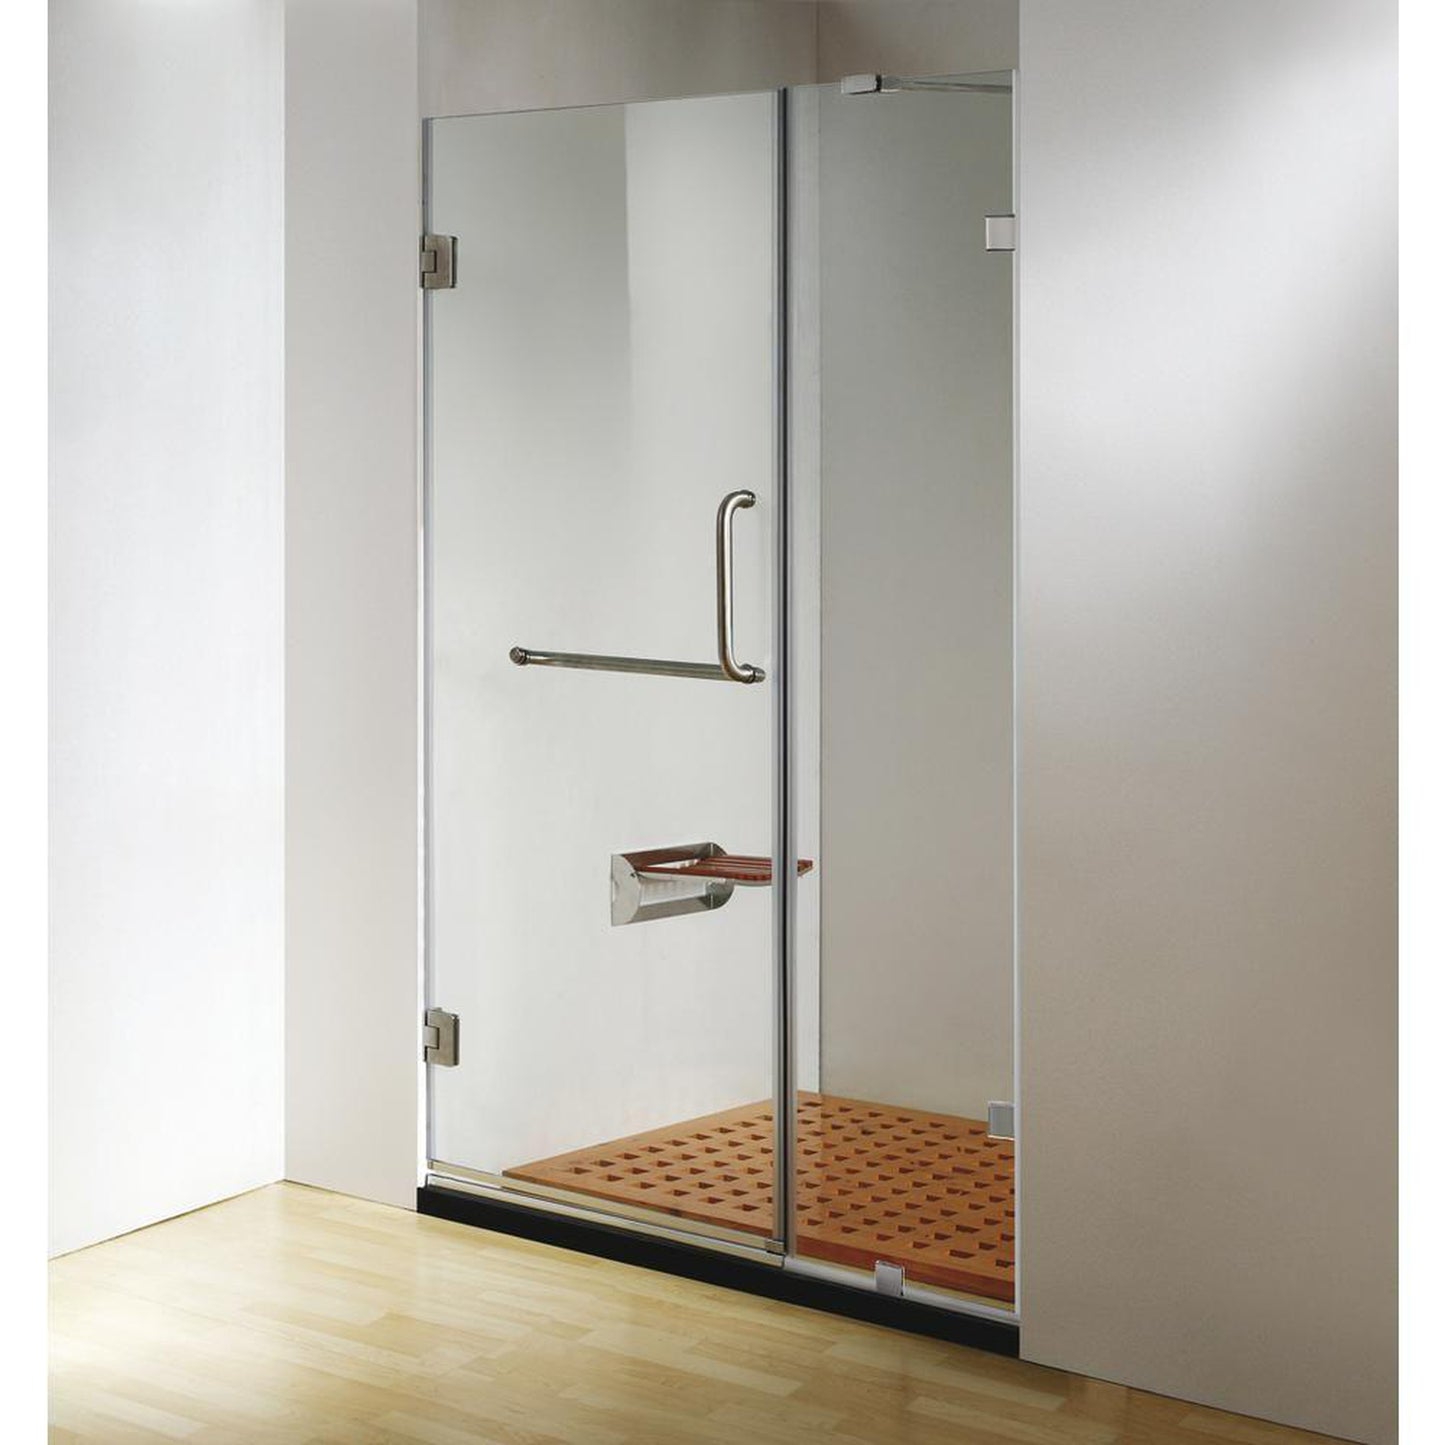 Dreamwerks Frameless Hinged Clear Glass Shower Door with, Handle and Towel Bar in Chrome